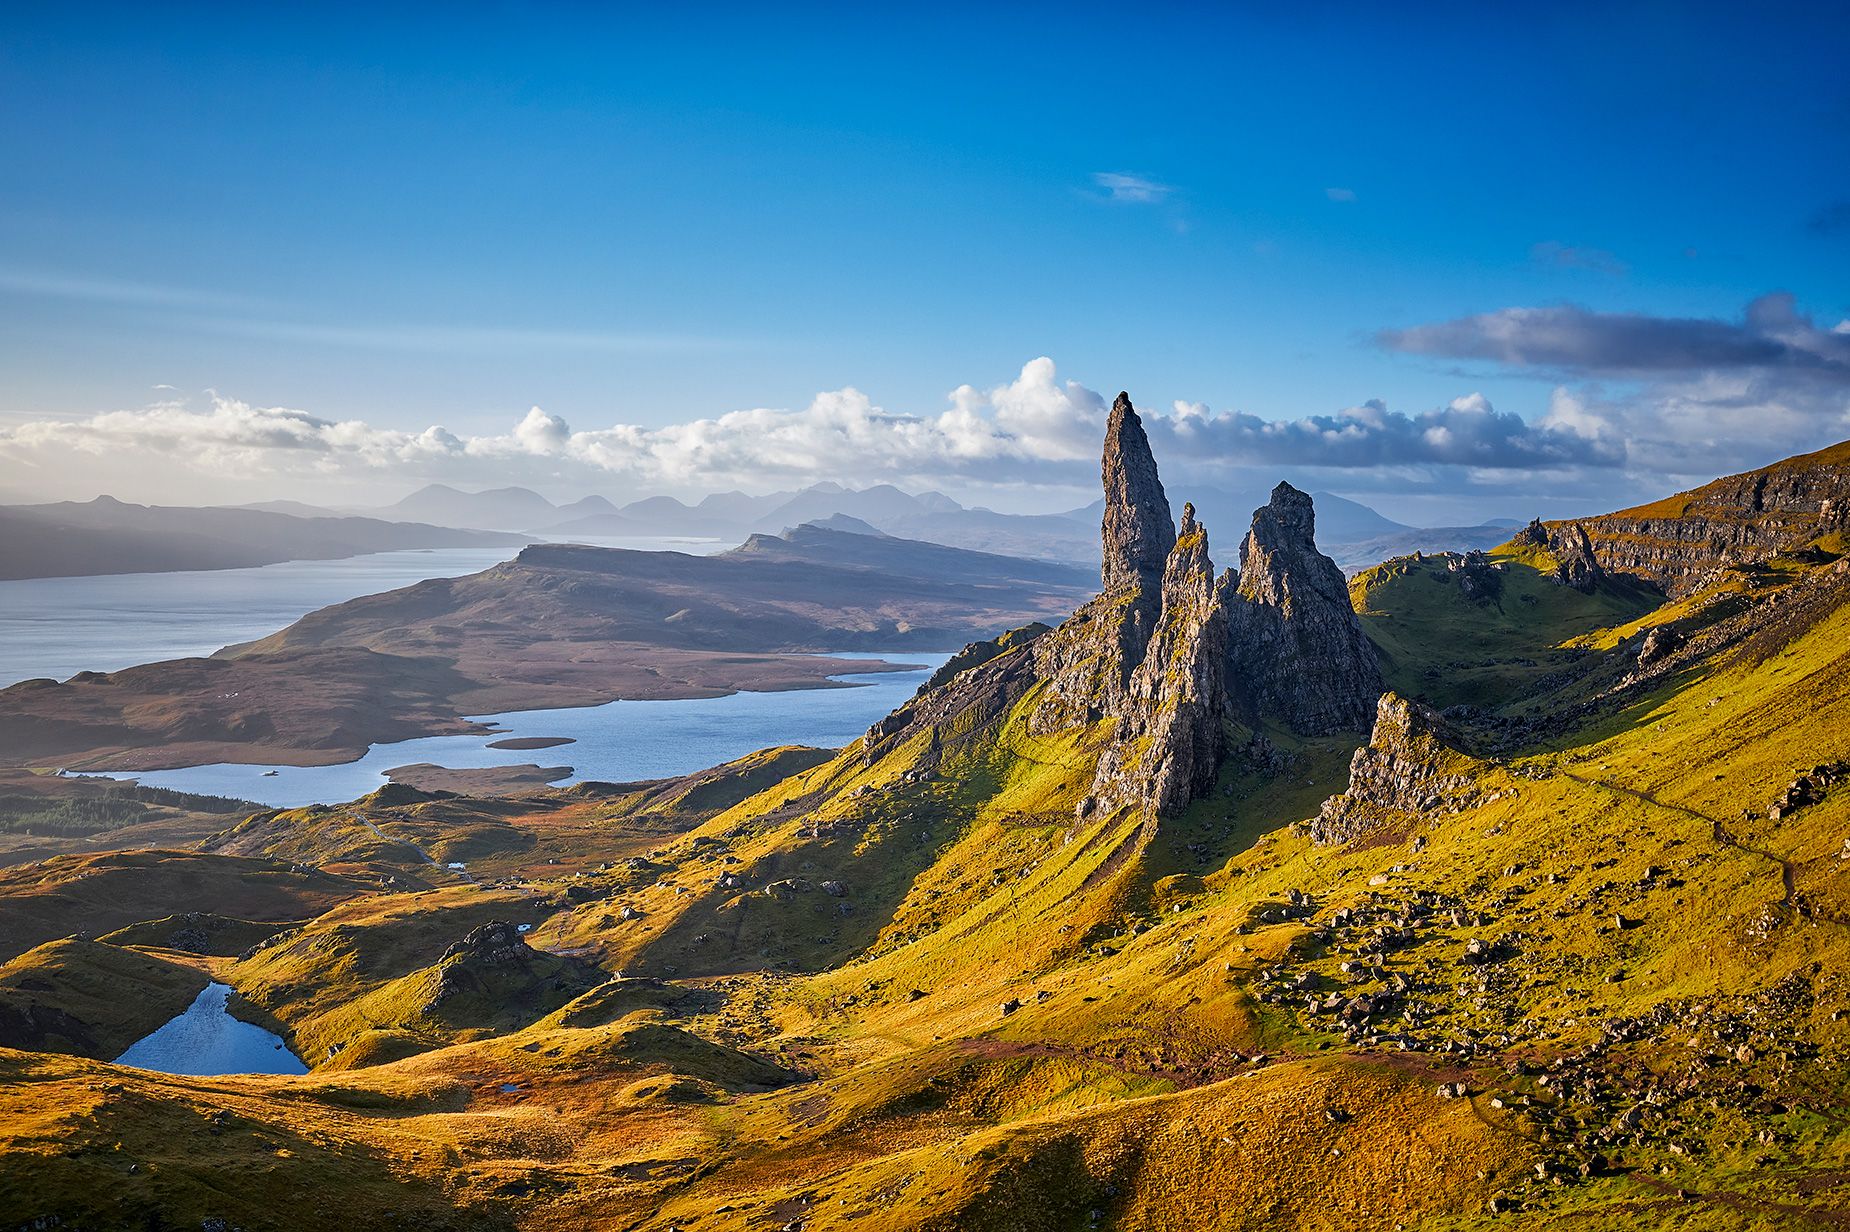 Gabriella and Dan hiked the Old Man of Storr together while on the Isle of Skye.